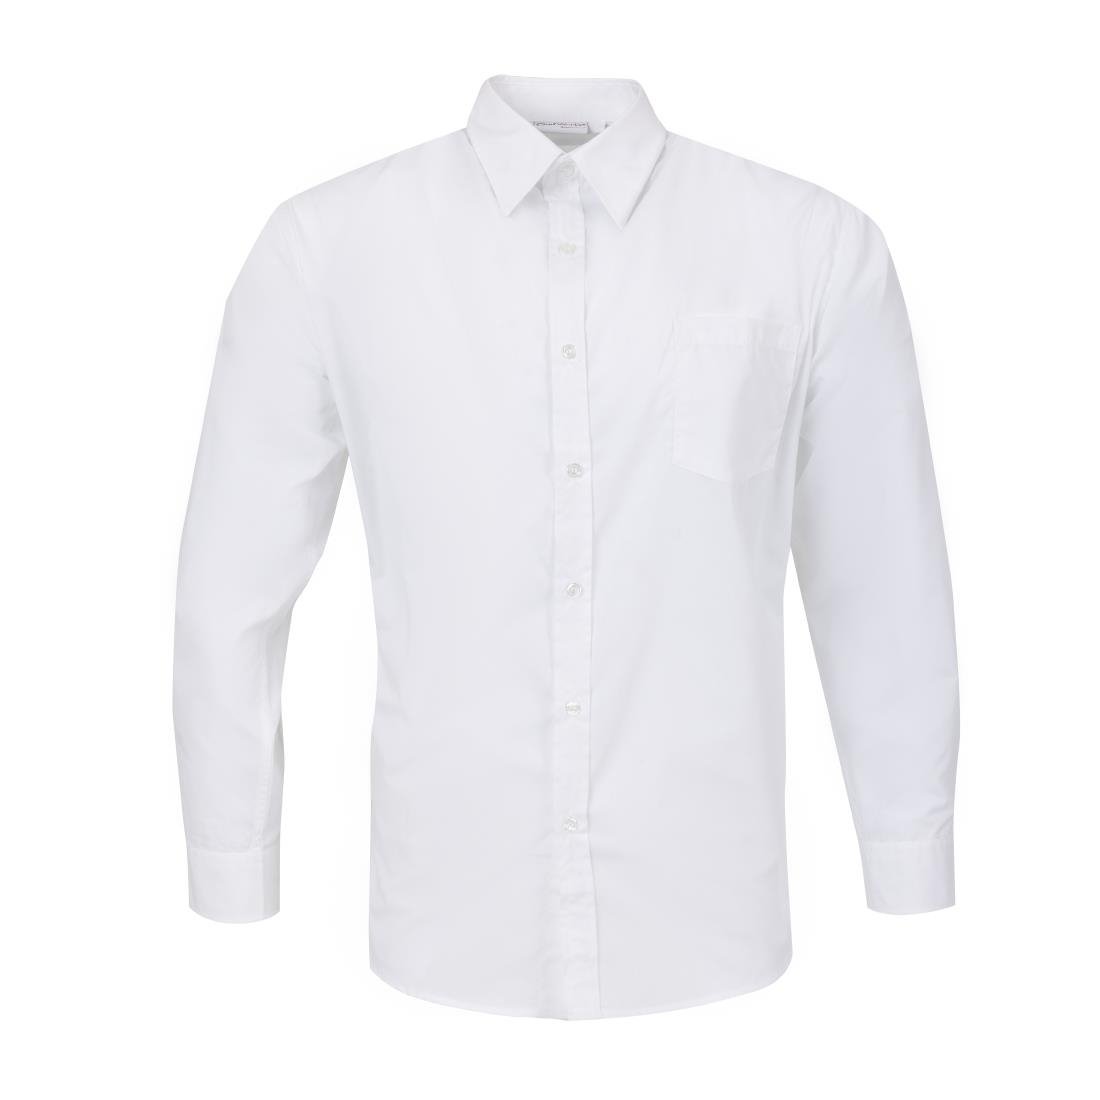 Chef Works Unisex Long Sleeve Shirt White JD Catering Equipment Solutions Ltd